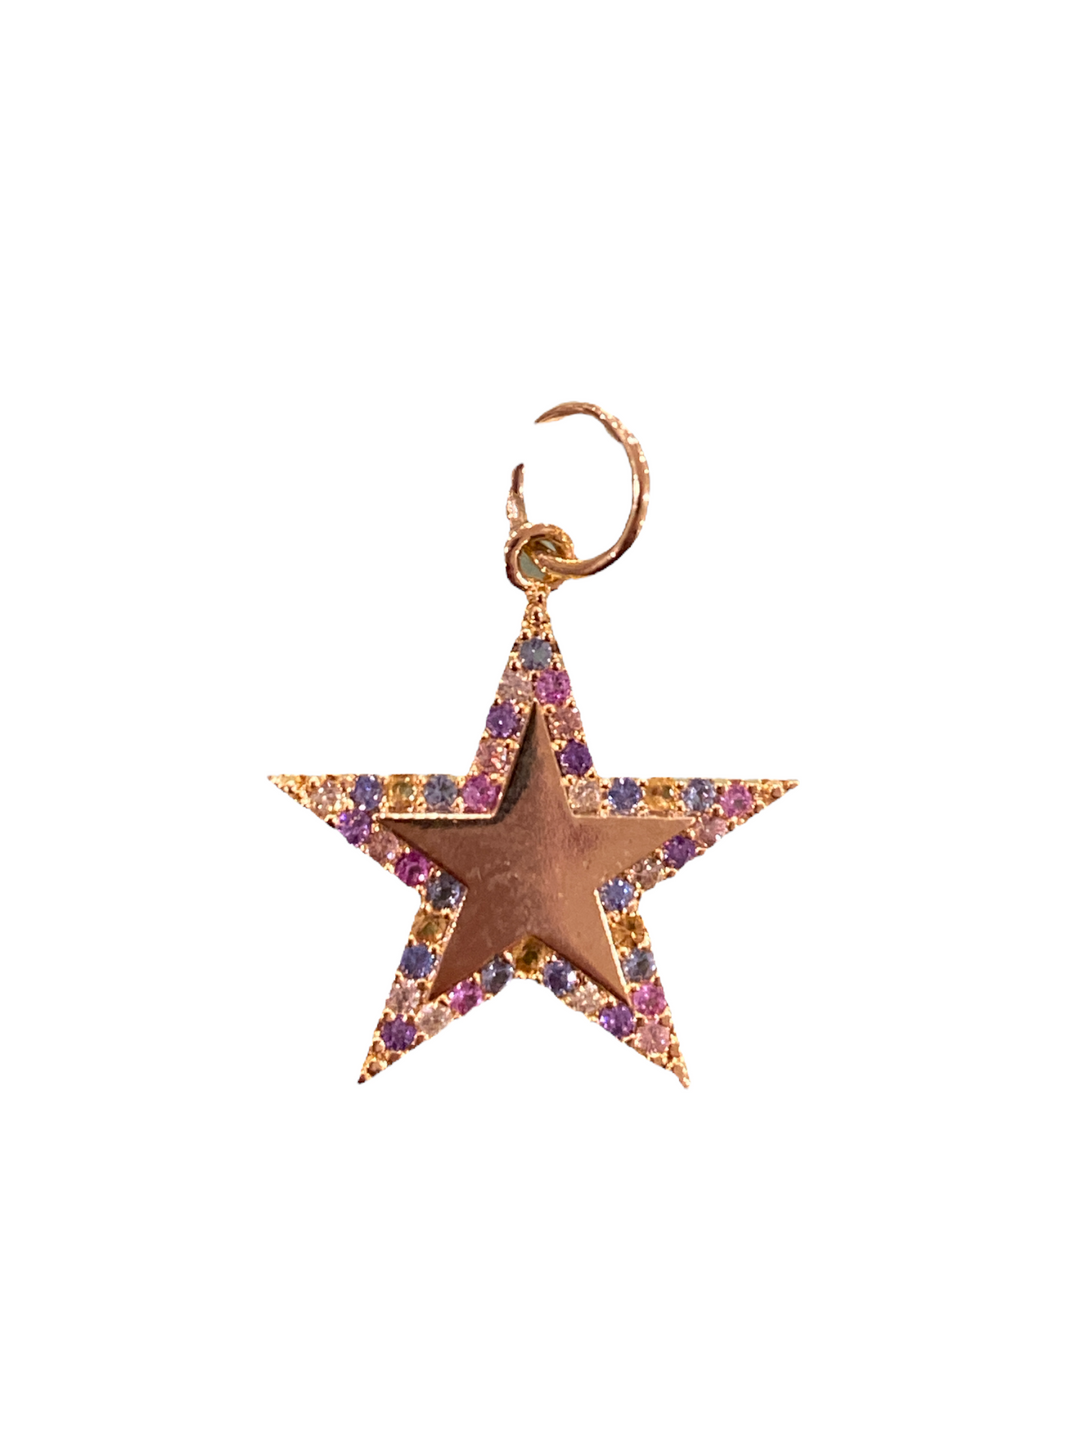 GOLD PAVE CZ RAINBOW STAR CHARM - Kingfisher Road - Online Boutique